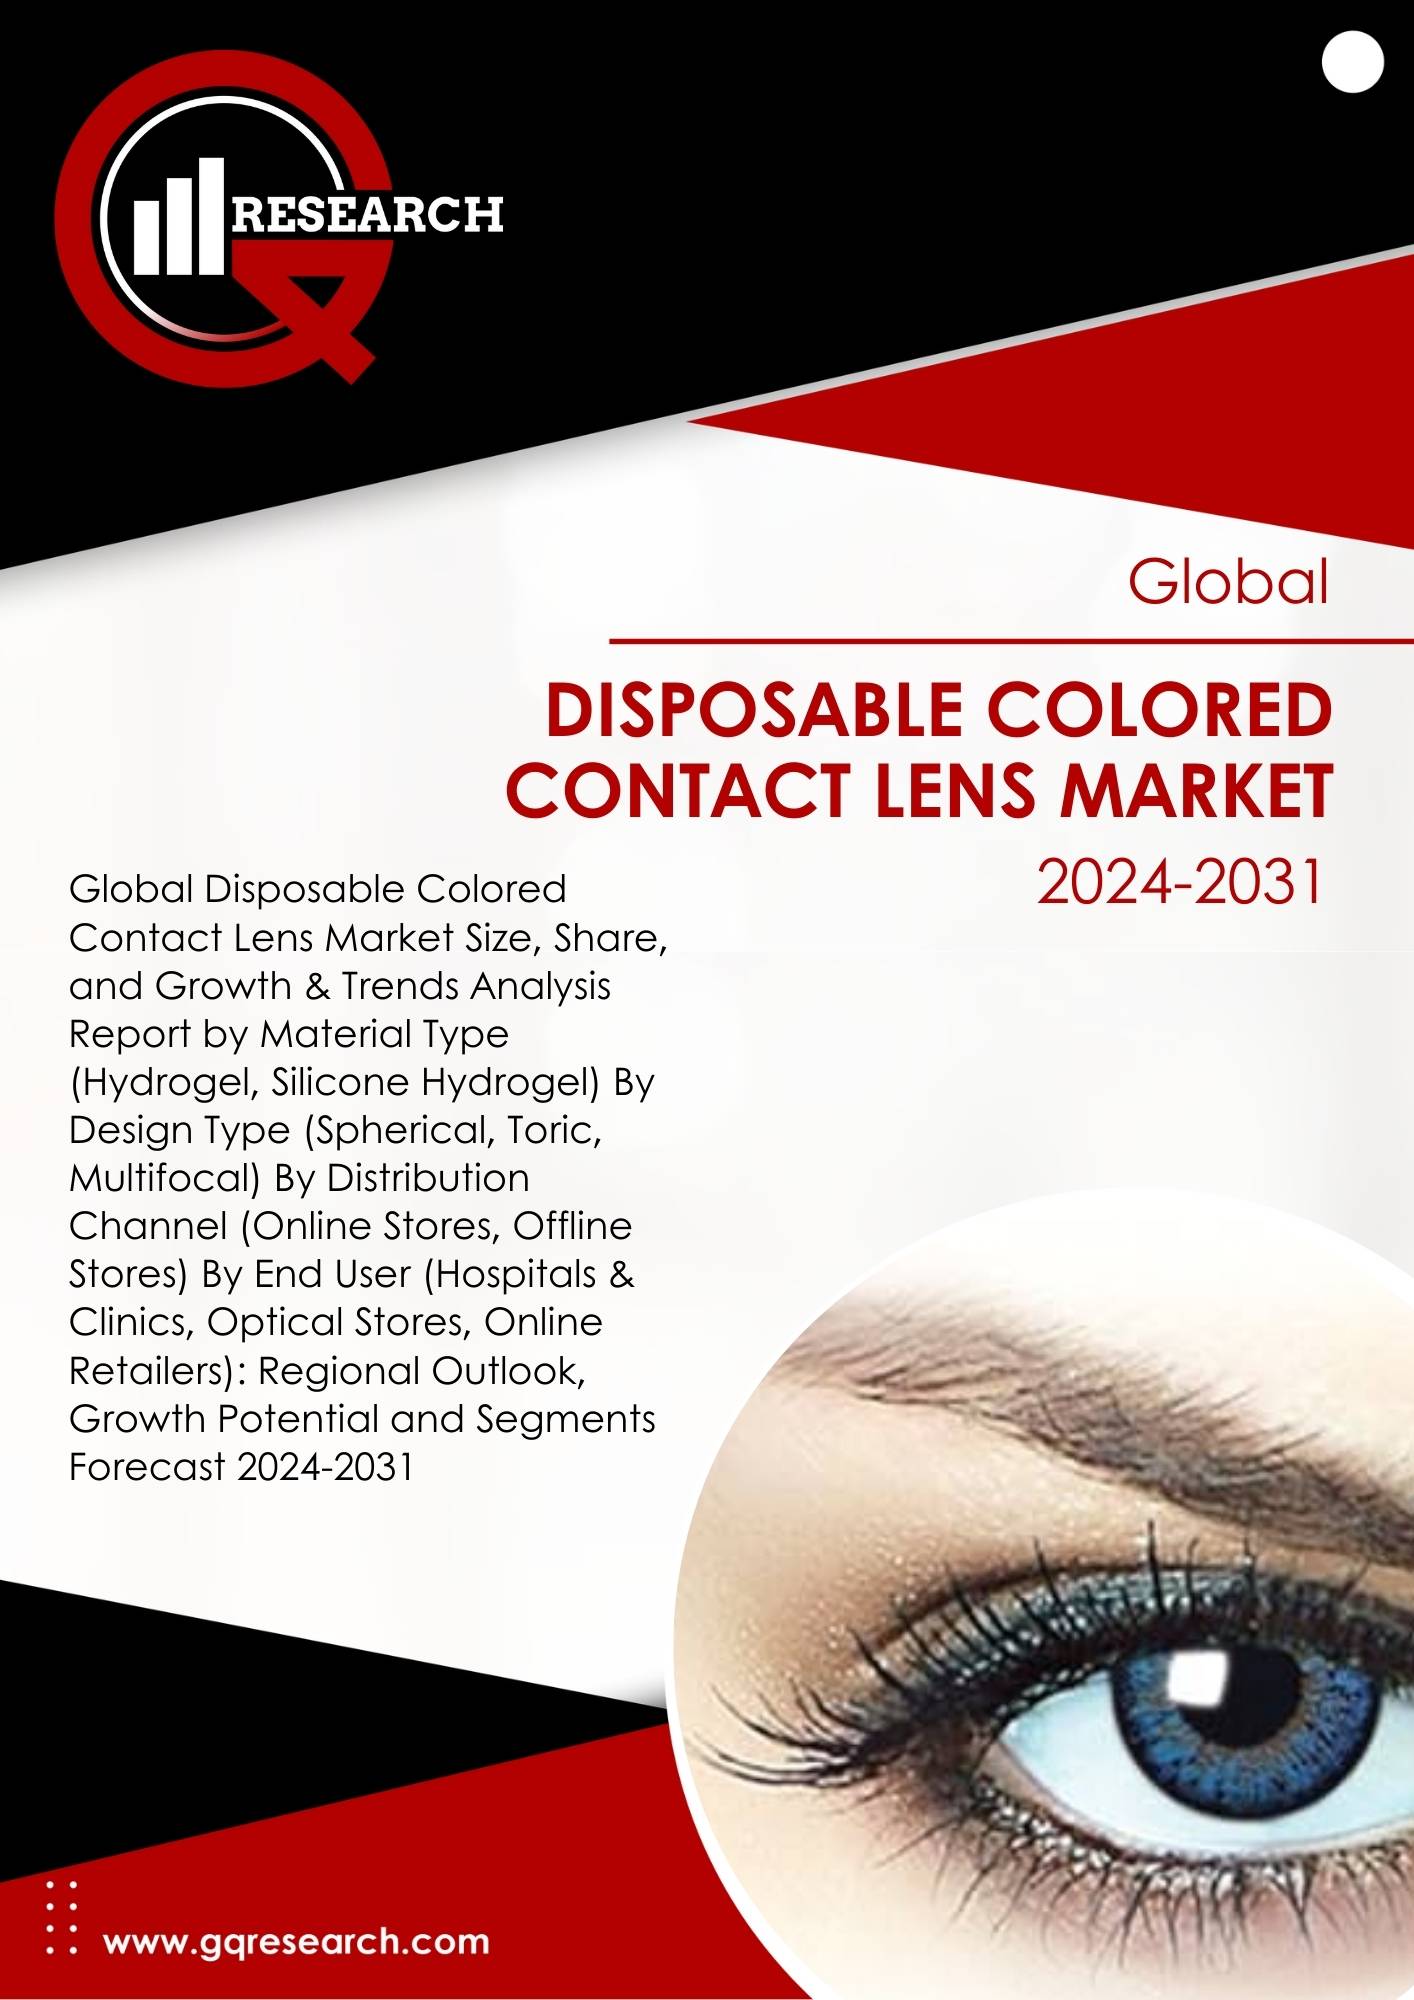 Disposable Colored Contact Lens Market Size, Share, Growth and Forecast to 2031 | GQ Research